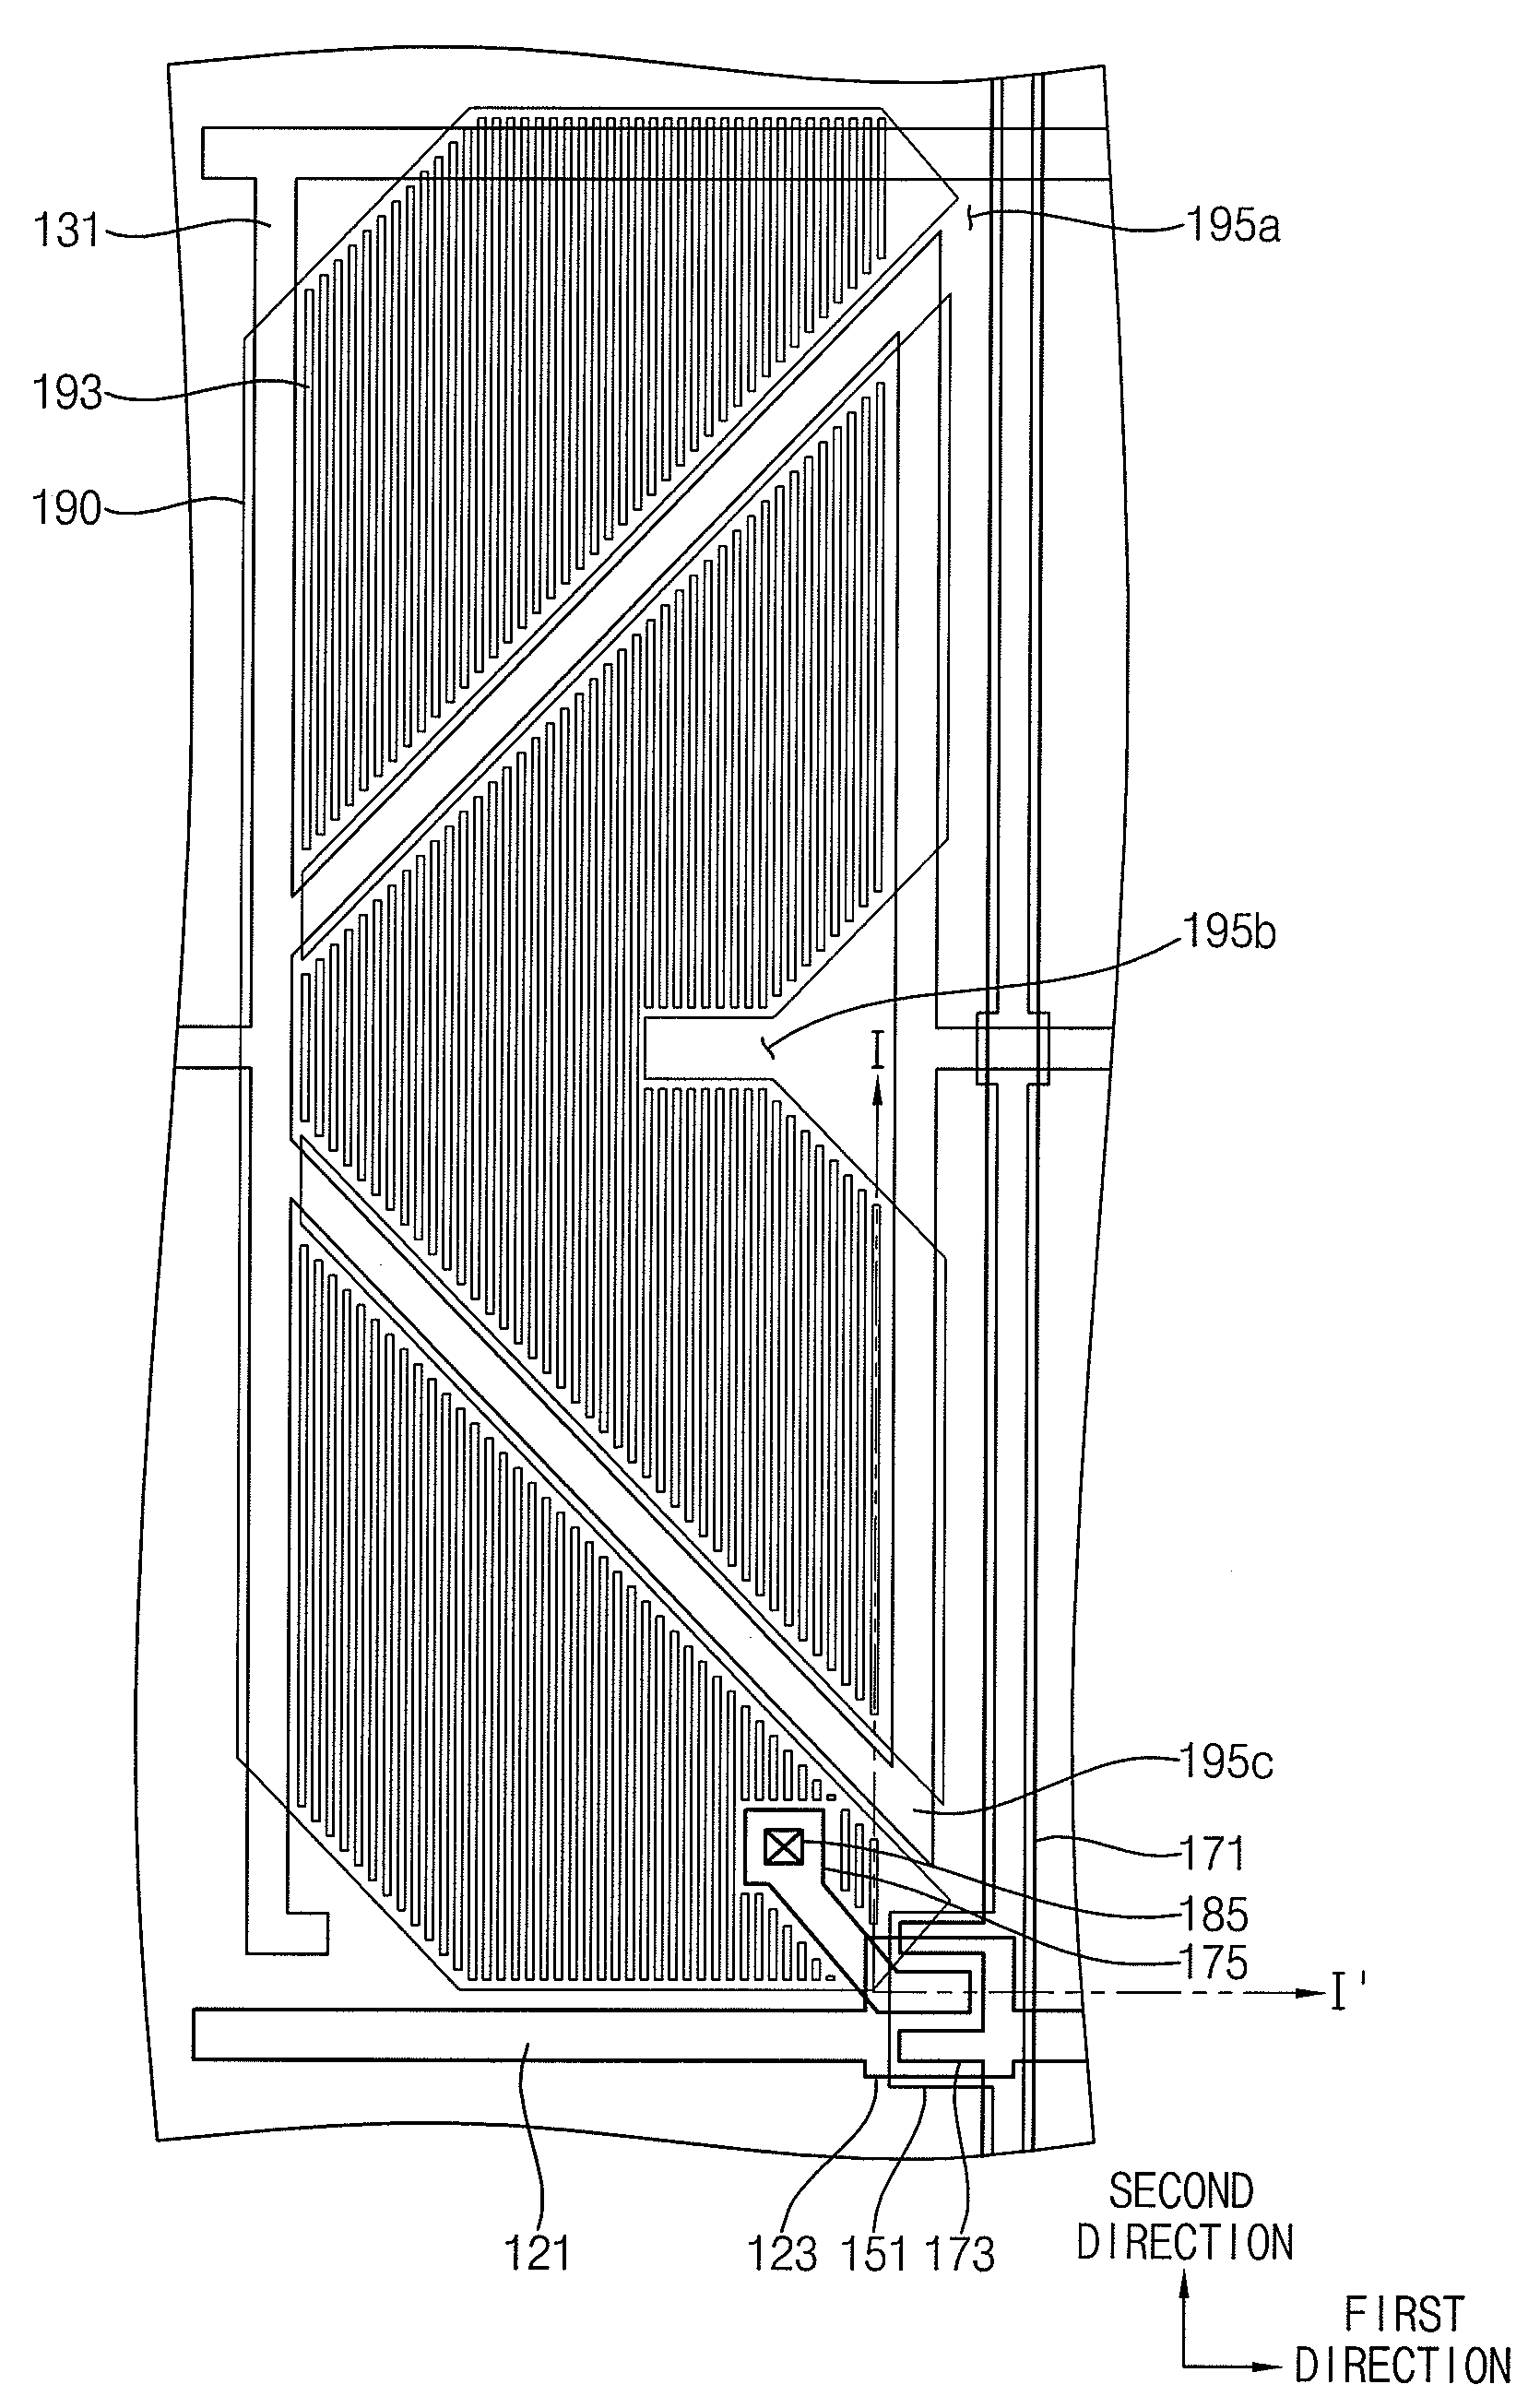 Display substrate, display apparatus having the display substrate and method for manufacturing the display apparatus